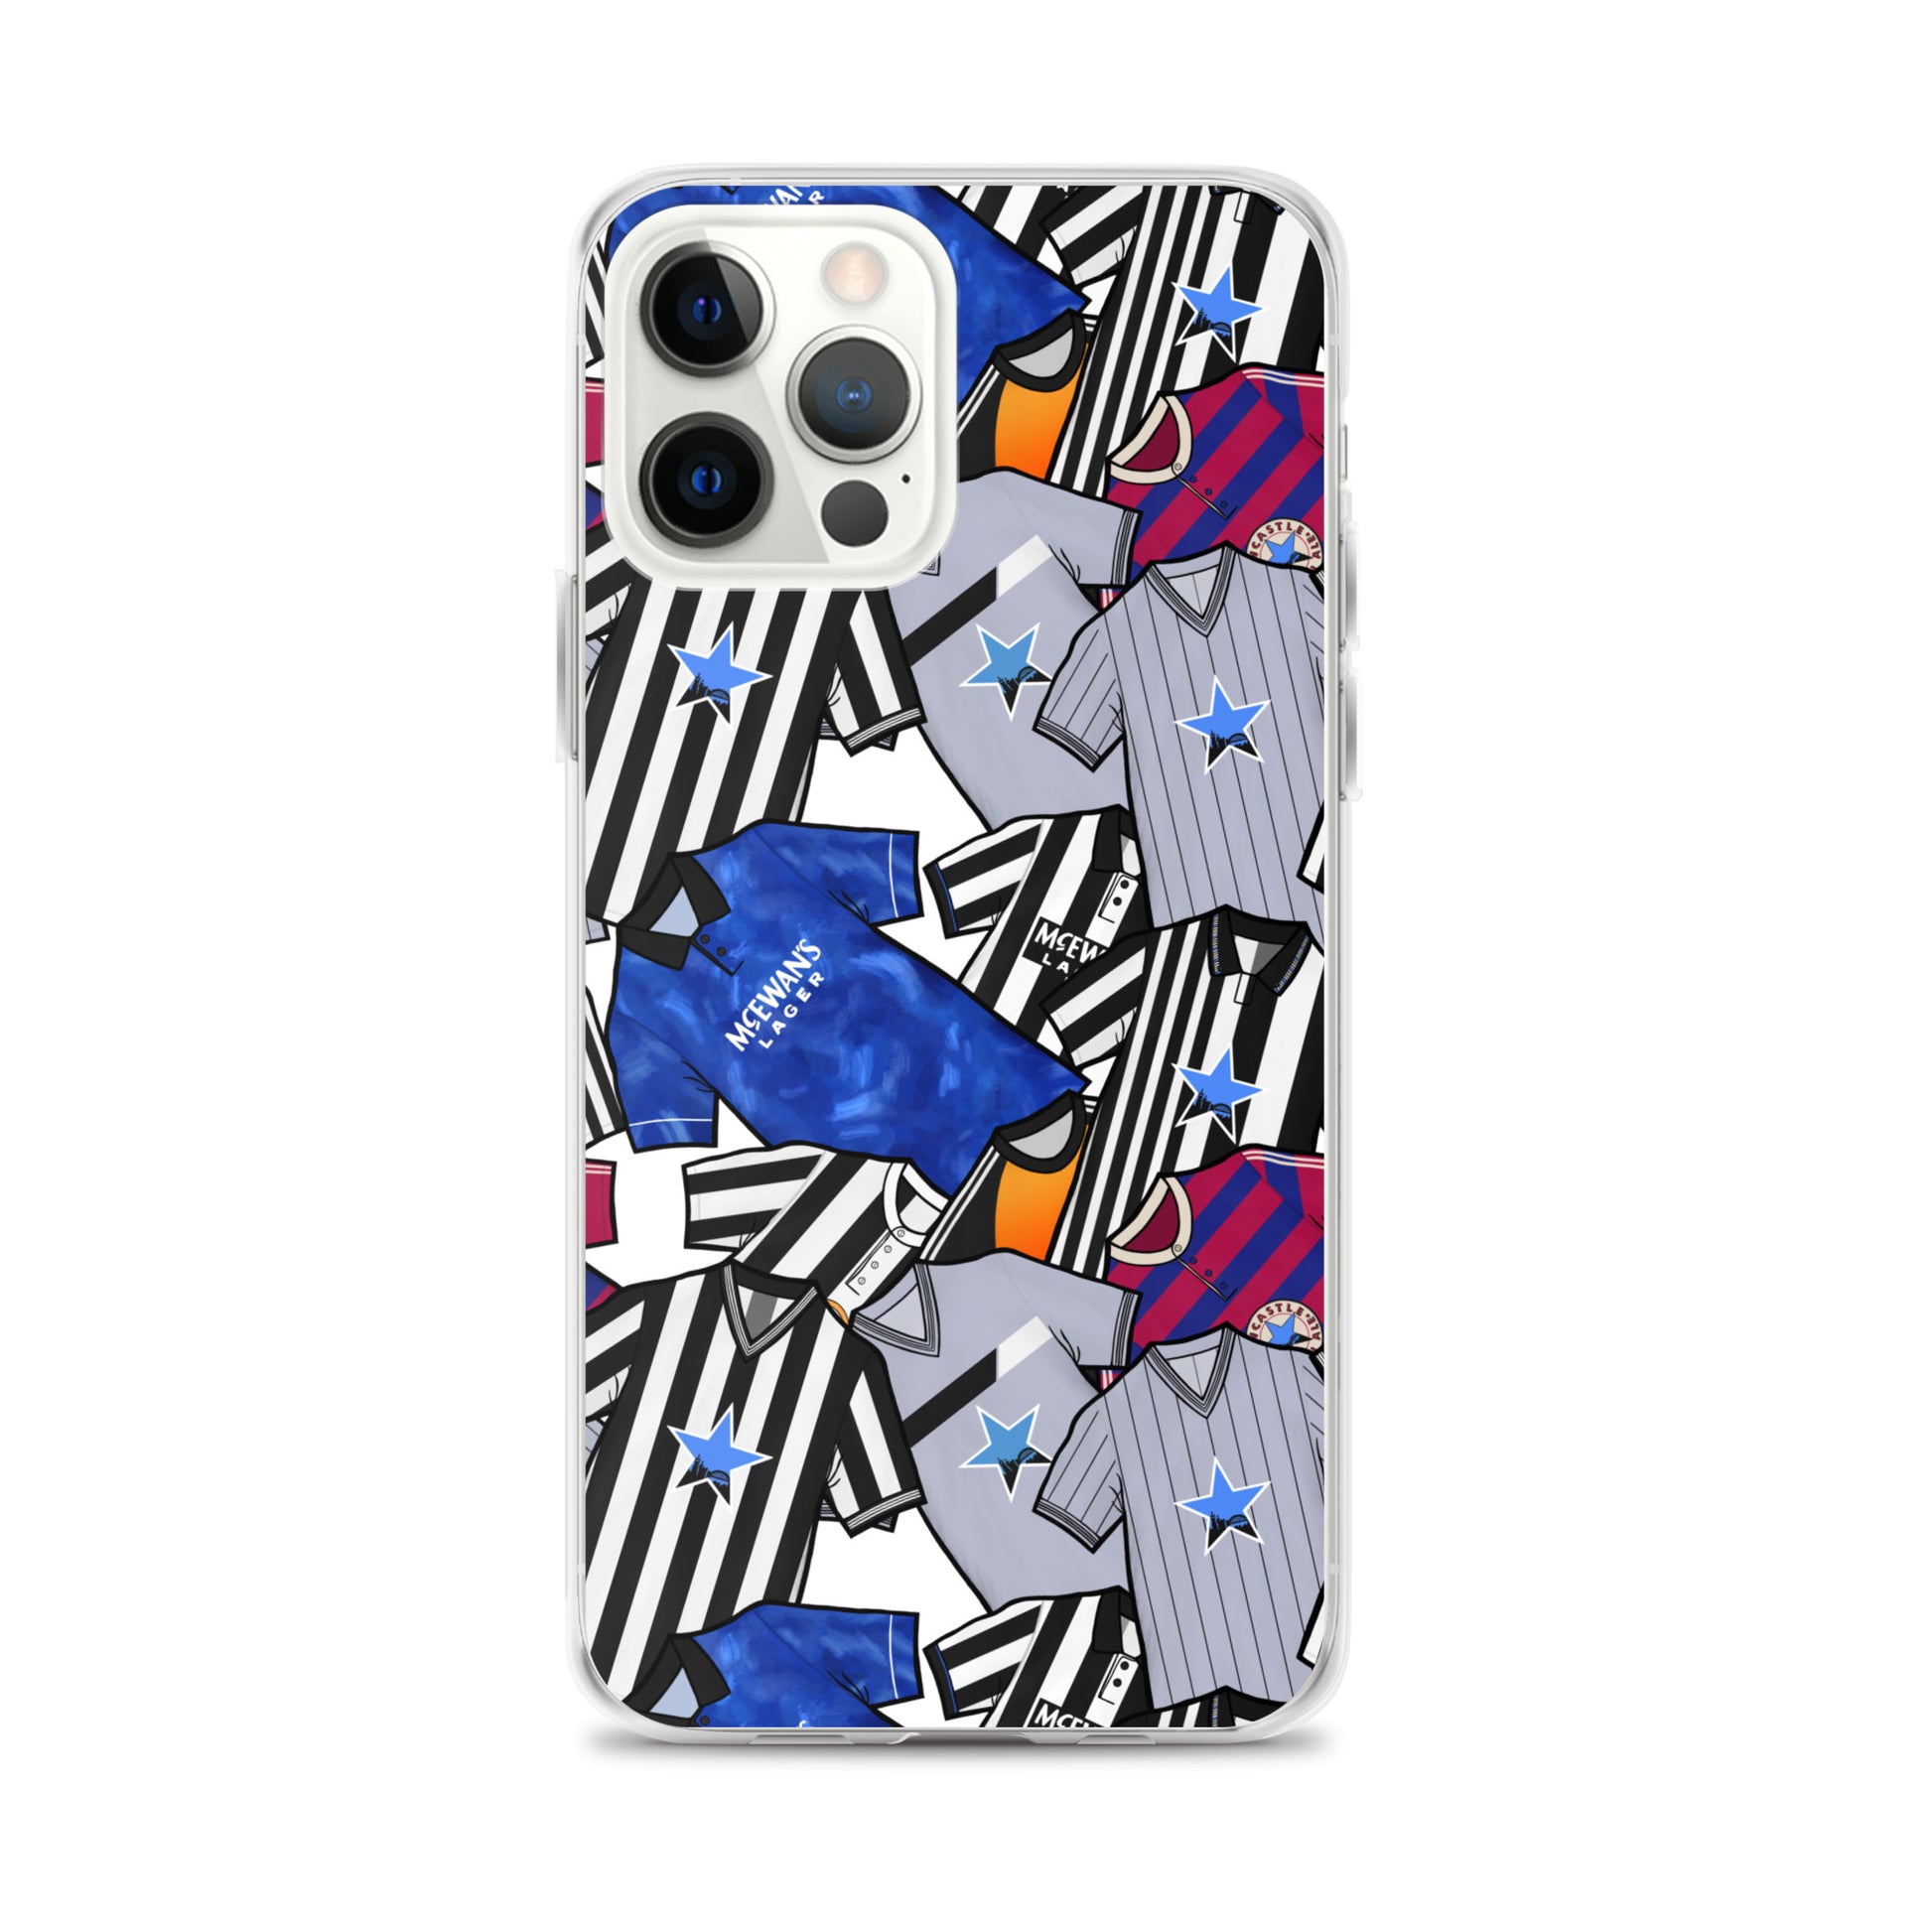 Phone case for iPhone 12 Pro Max inspired by the Retro shirts of Newcastle United!